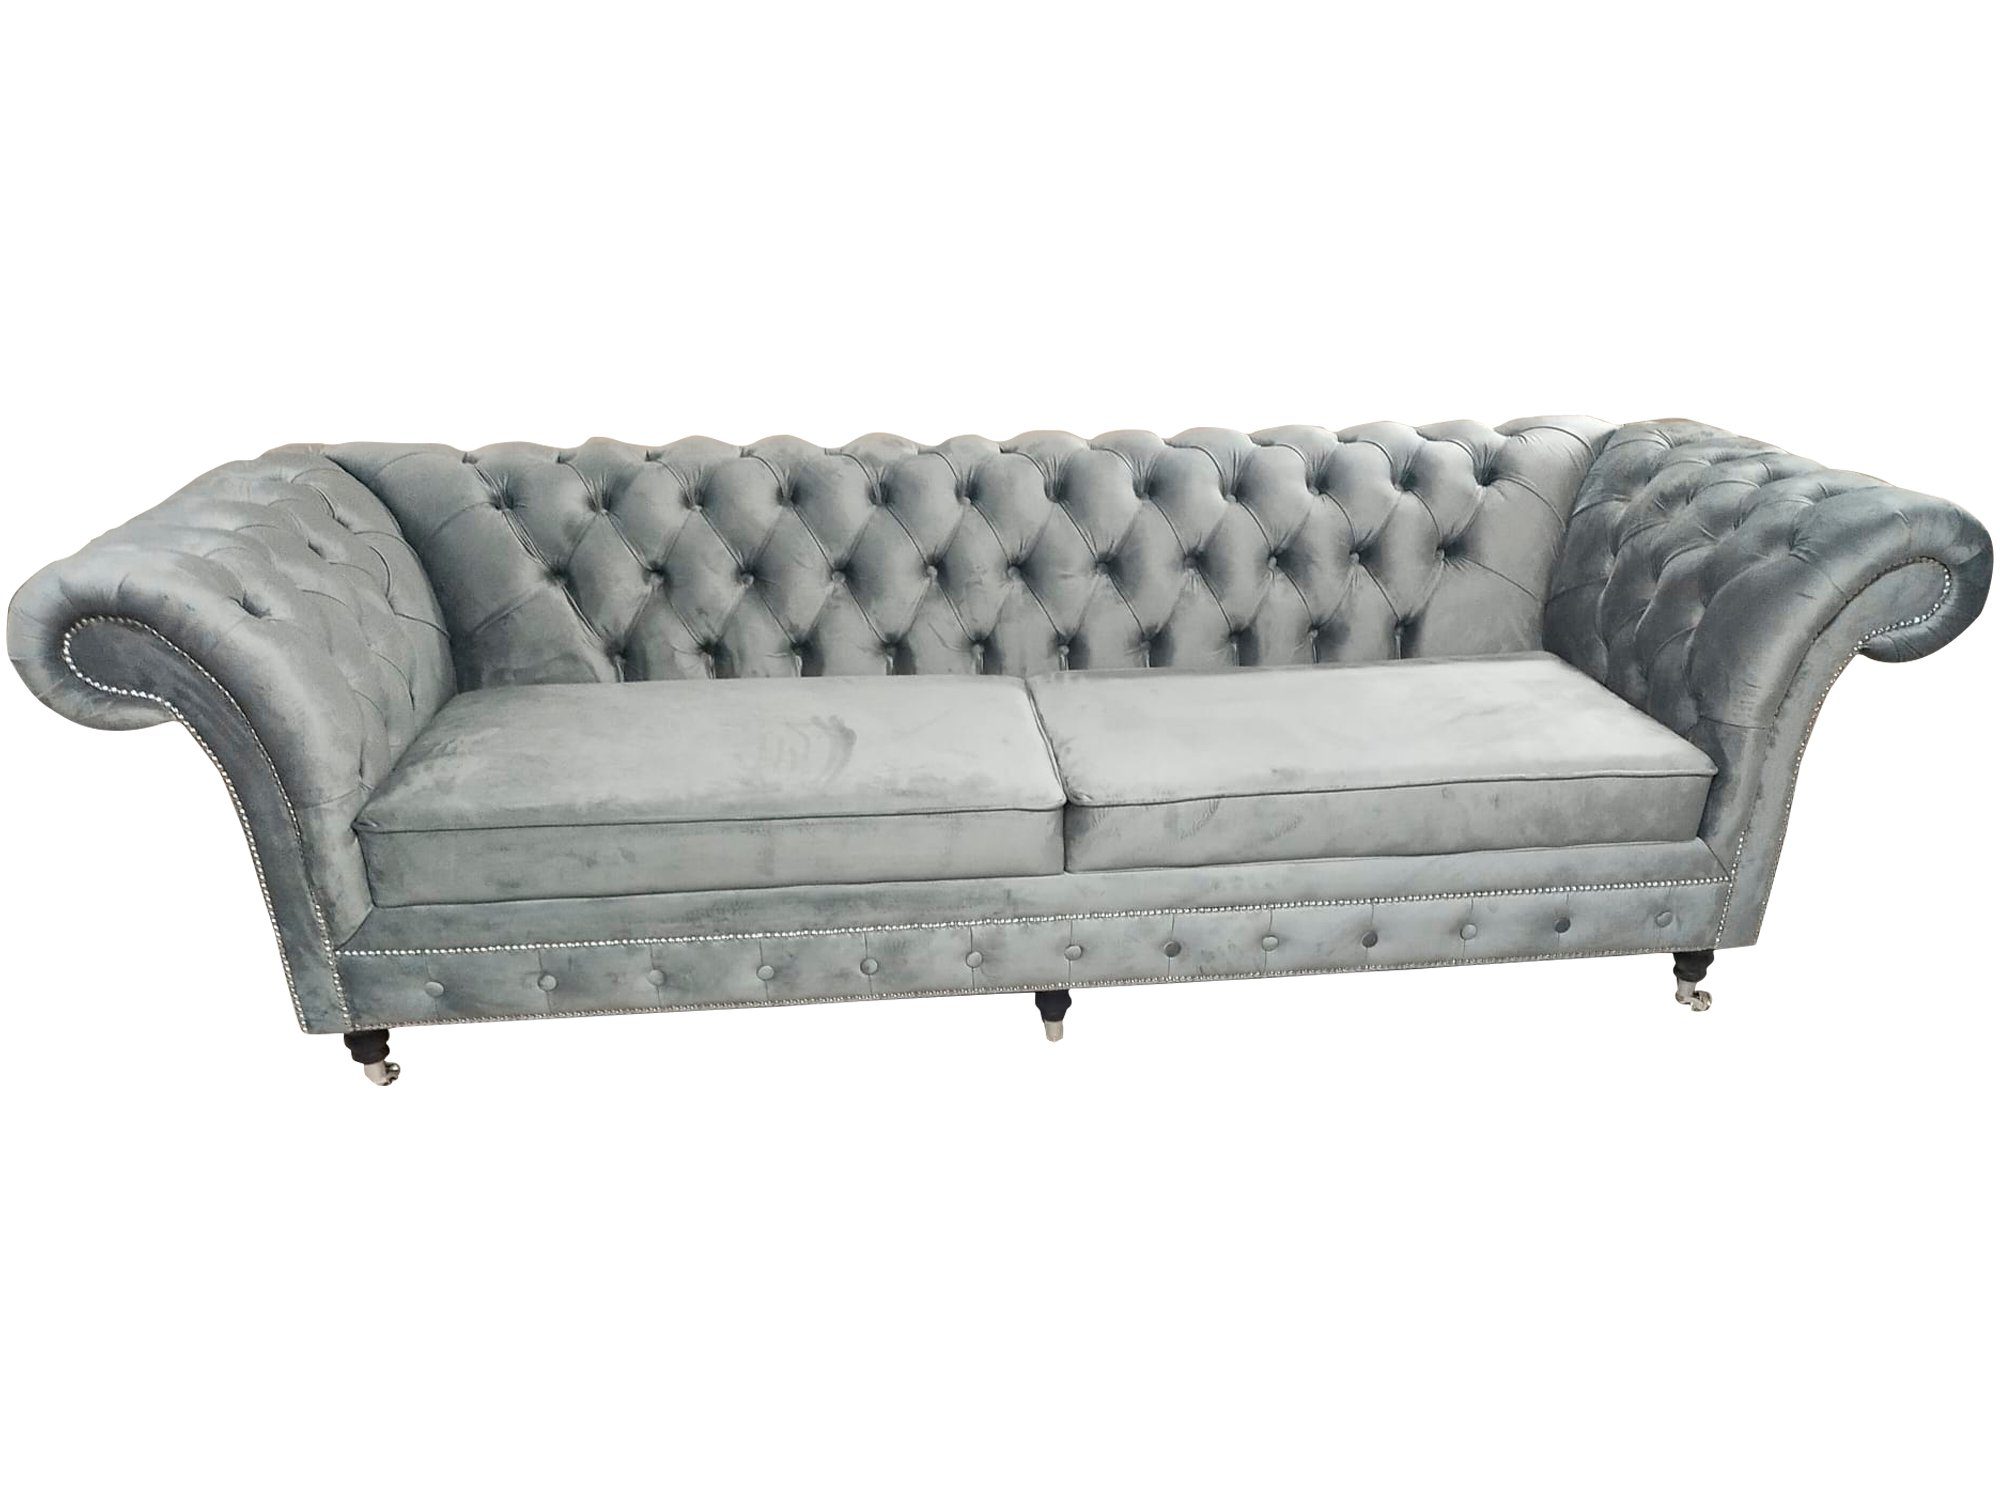 JVmoebel Sofa, Sofa Chesterfield 3 Sitzer Couch Textil Stoff Couchen Sofas Polster